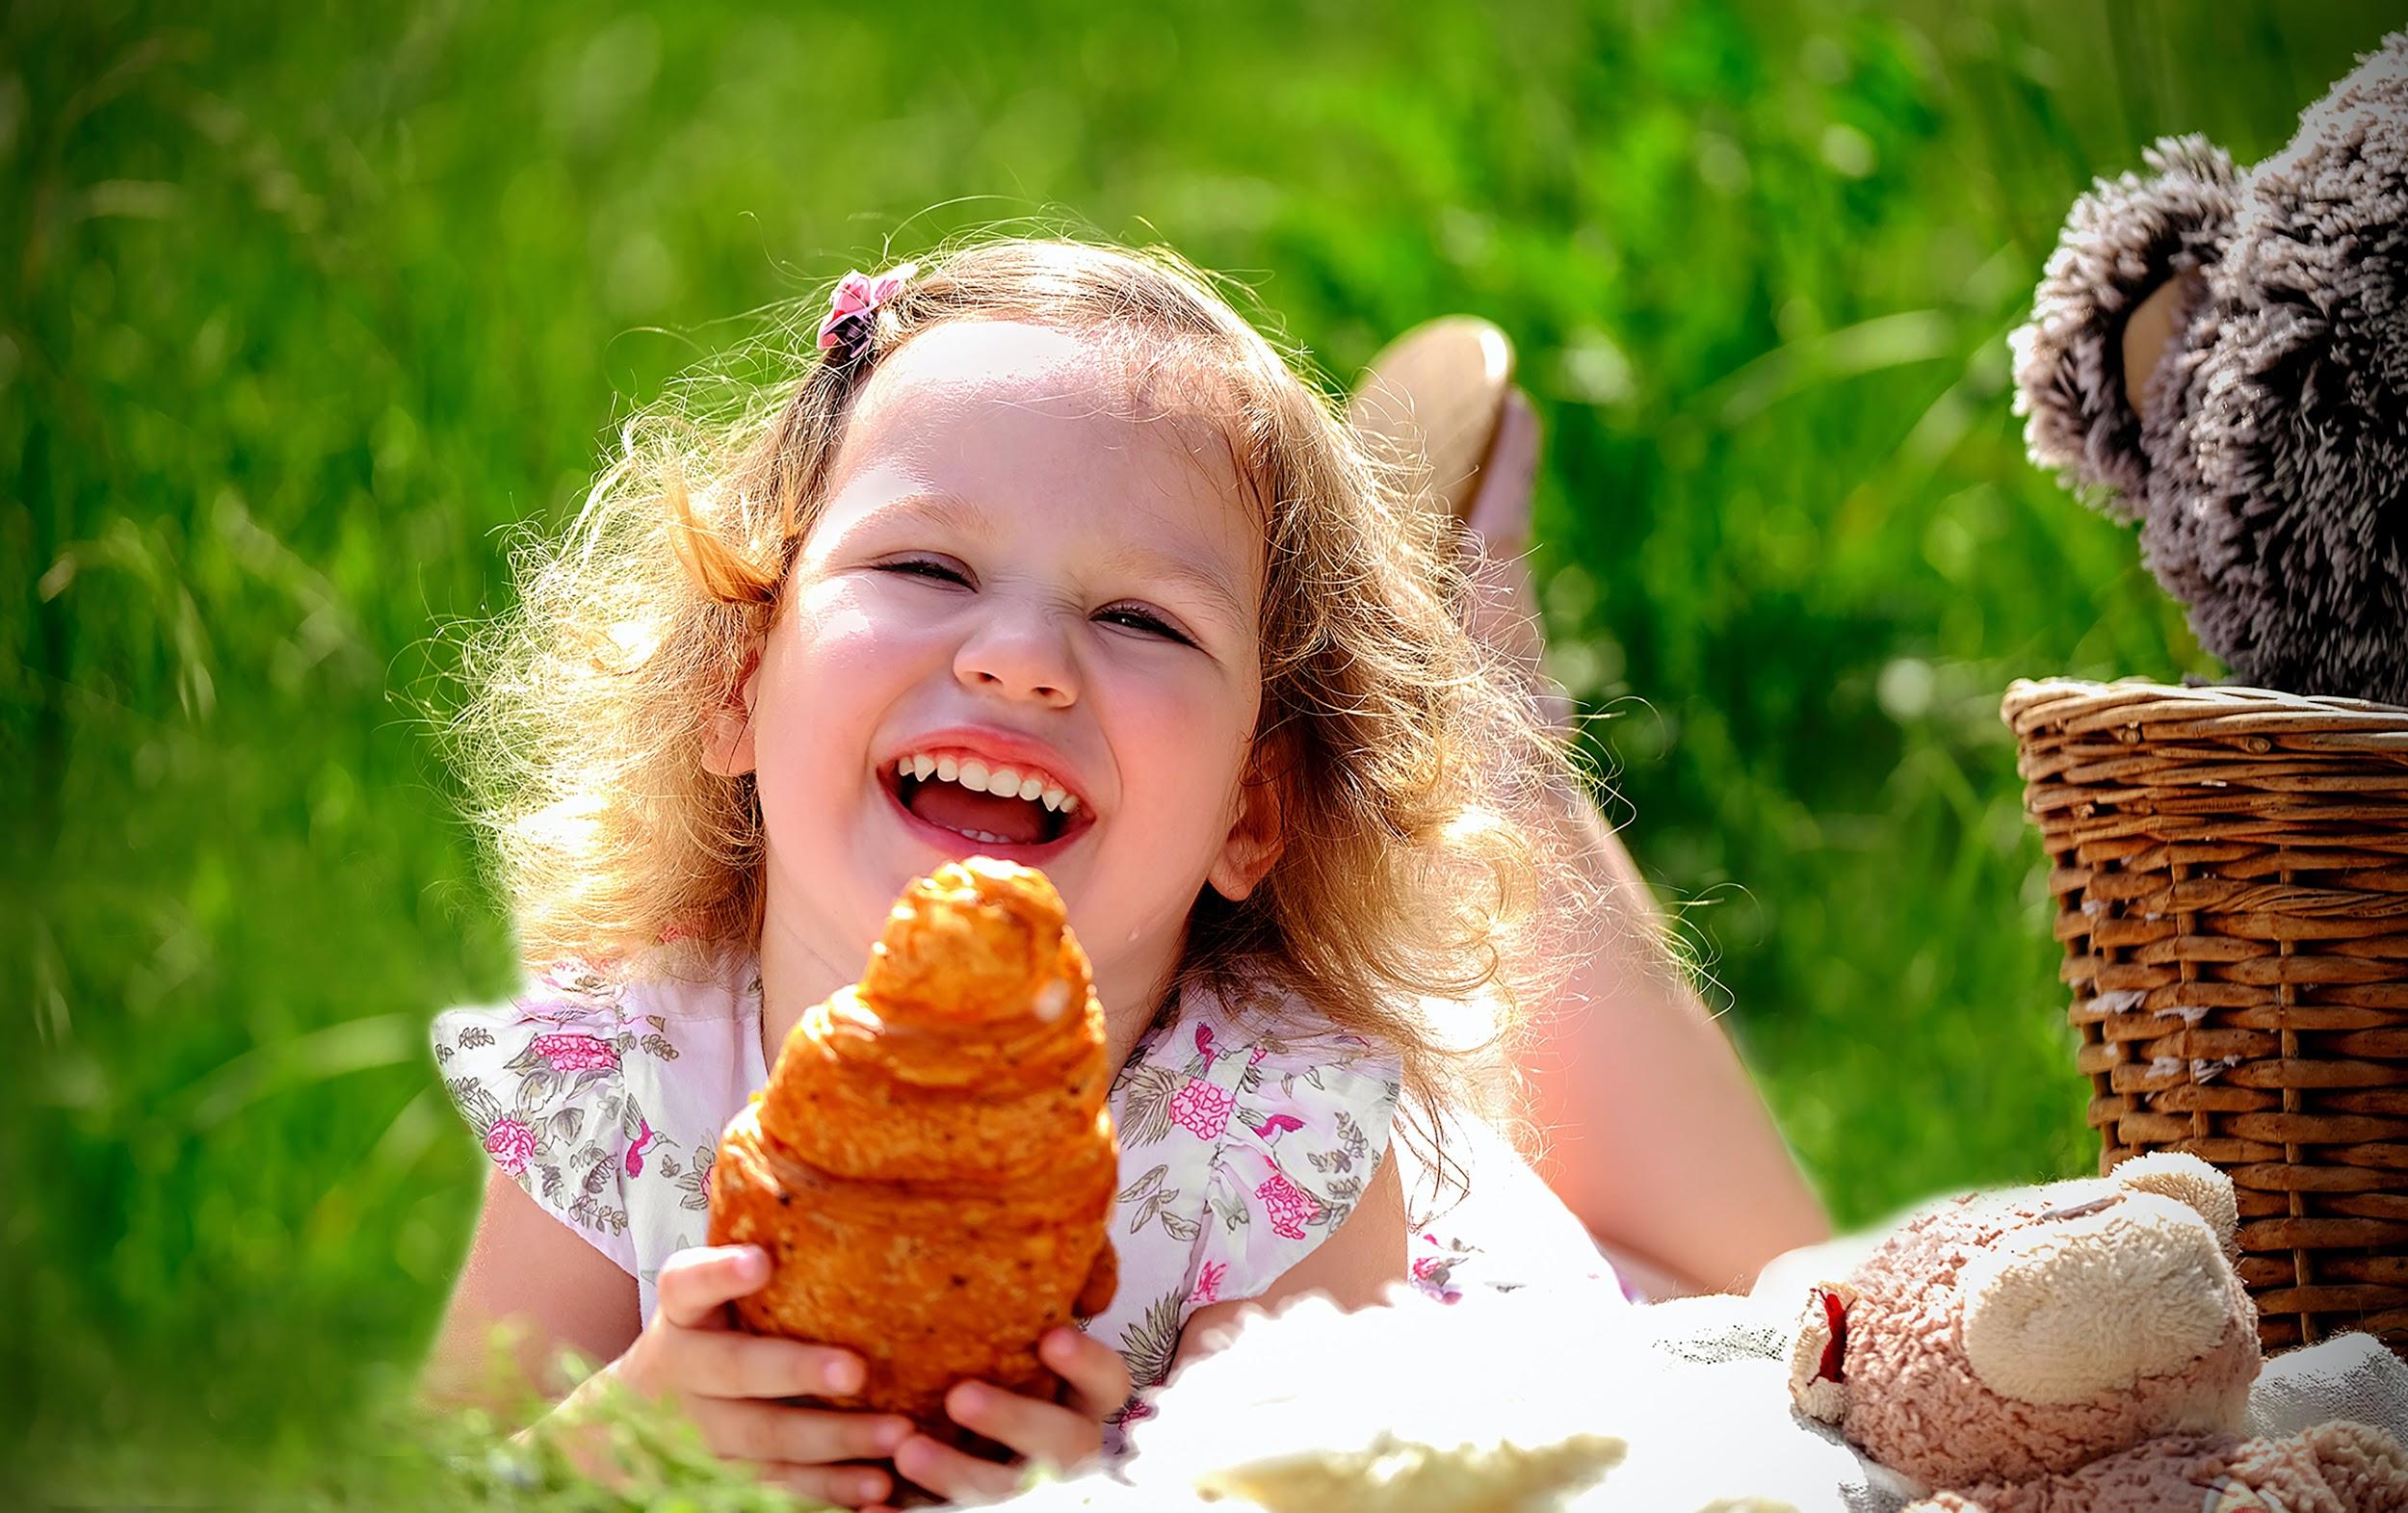 A little girl laying in a field on her tummy. She is looking at the camera smiling and laughing, and holding a croissant.